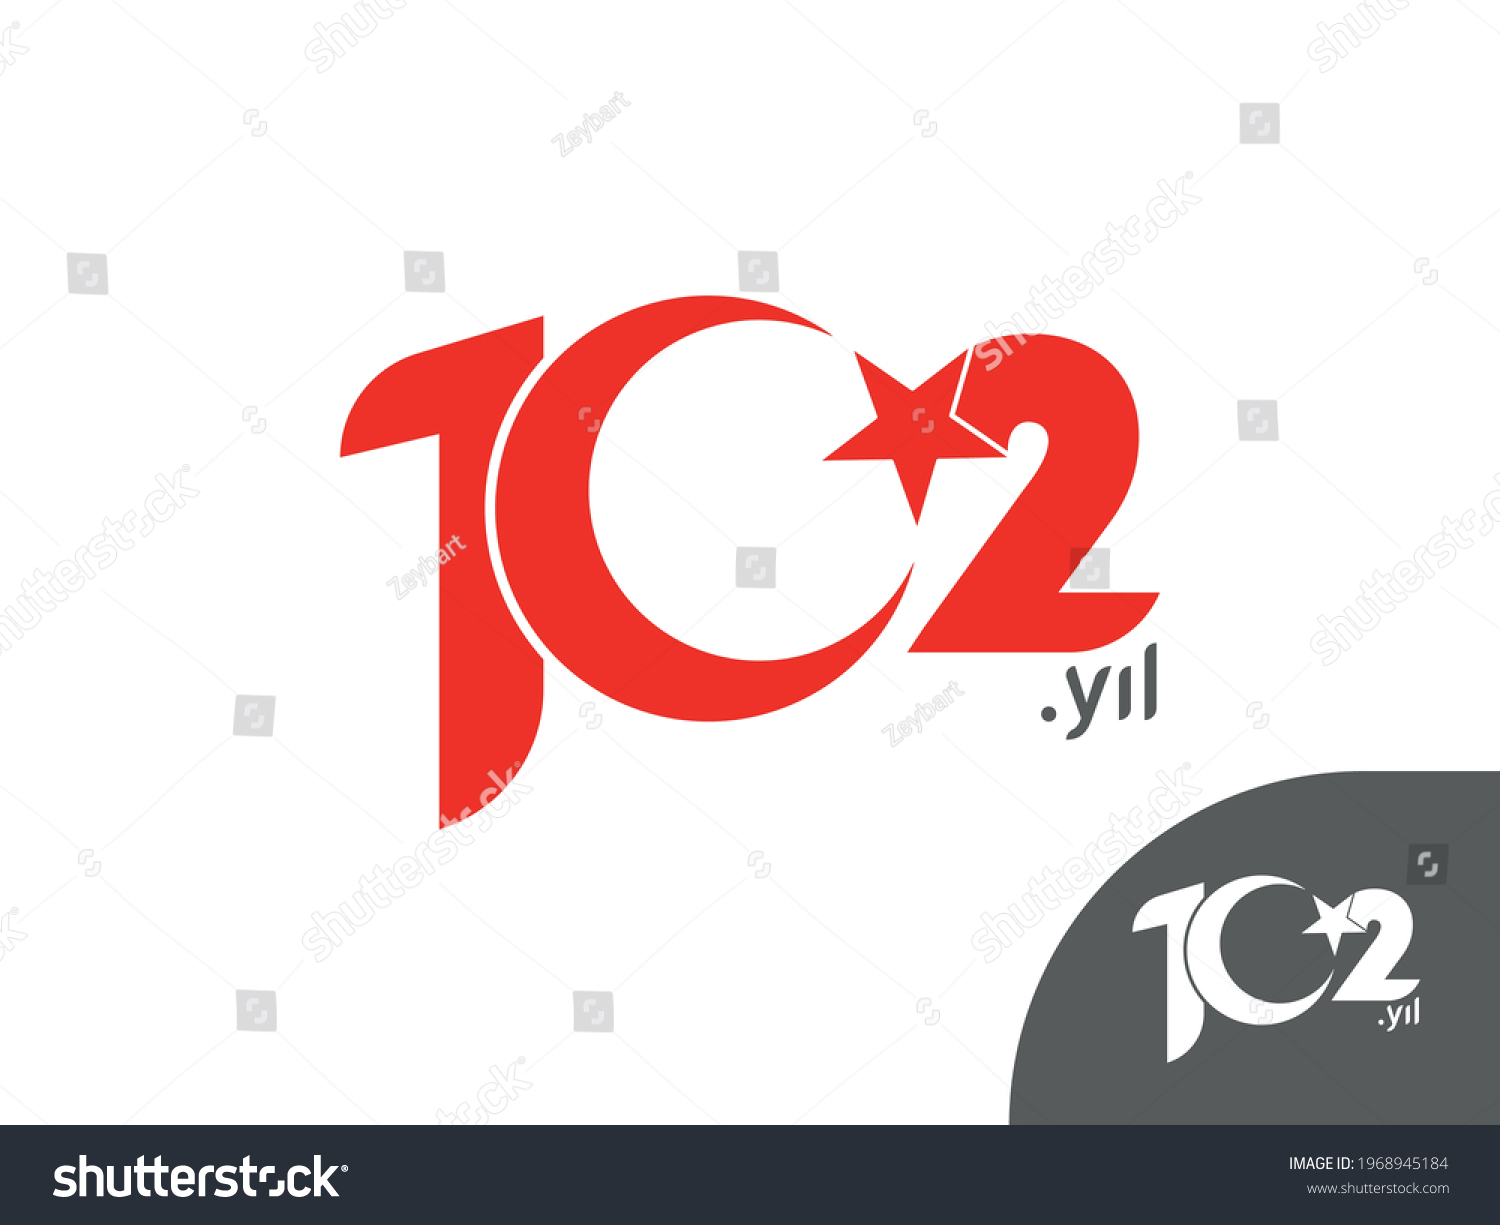 SVG of 102 years logo. 102-year-old red Turkish flag vector illustration. Important day, holiday and memorial message message. In its 102nd year. svg